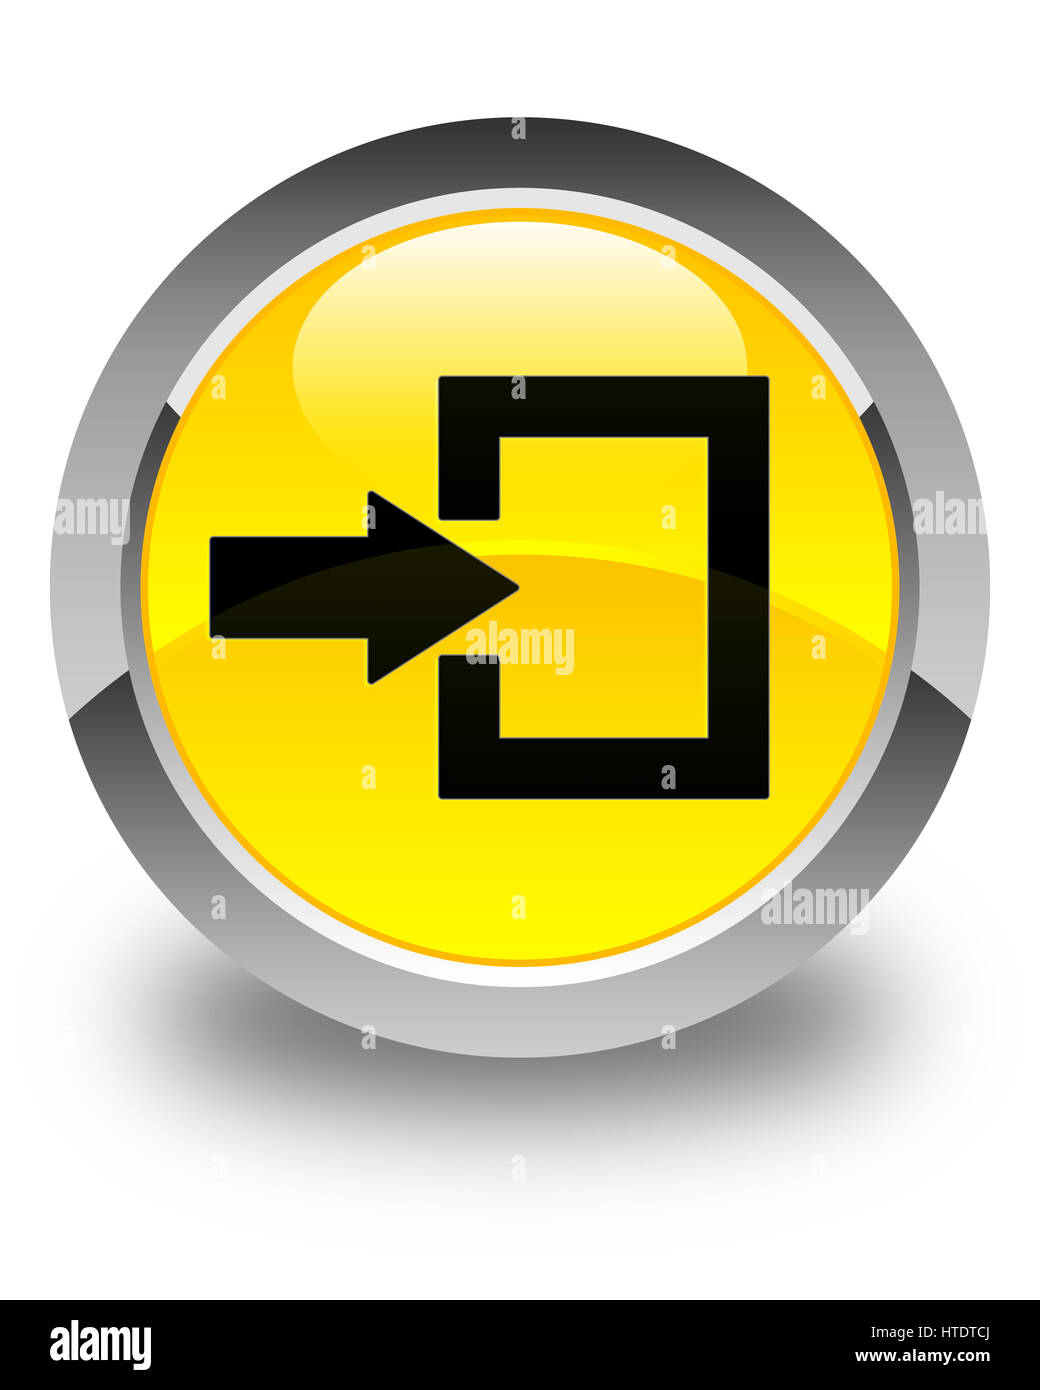 Login icon isolated on glossy yellow round button abstract illustration Stock Photo